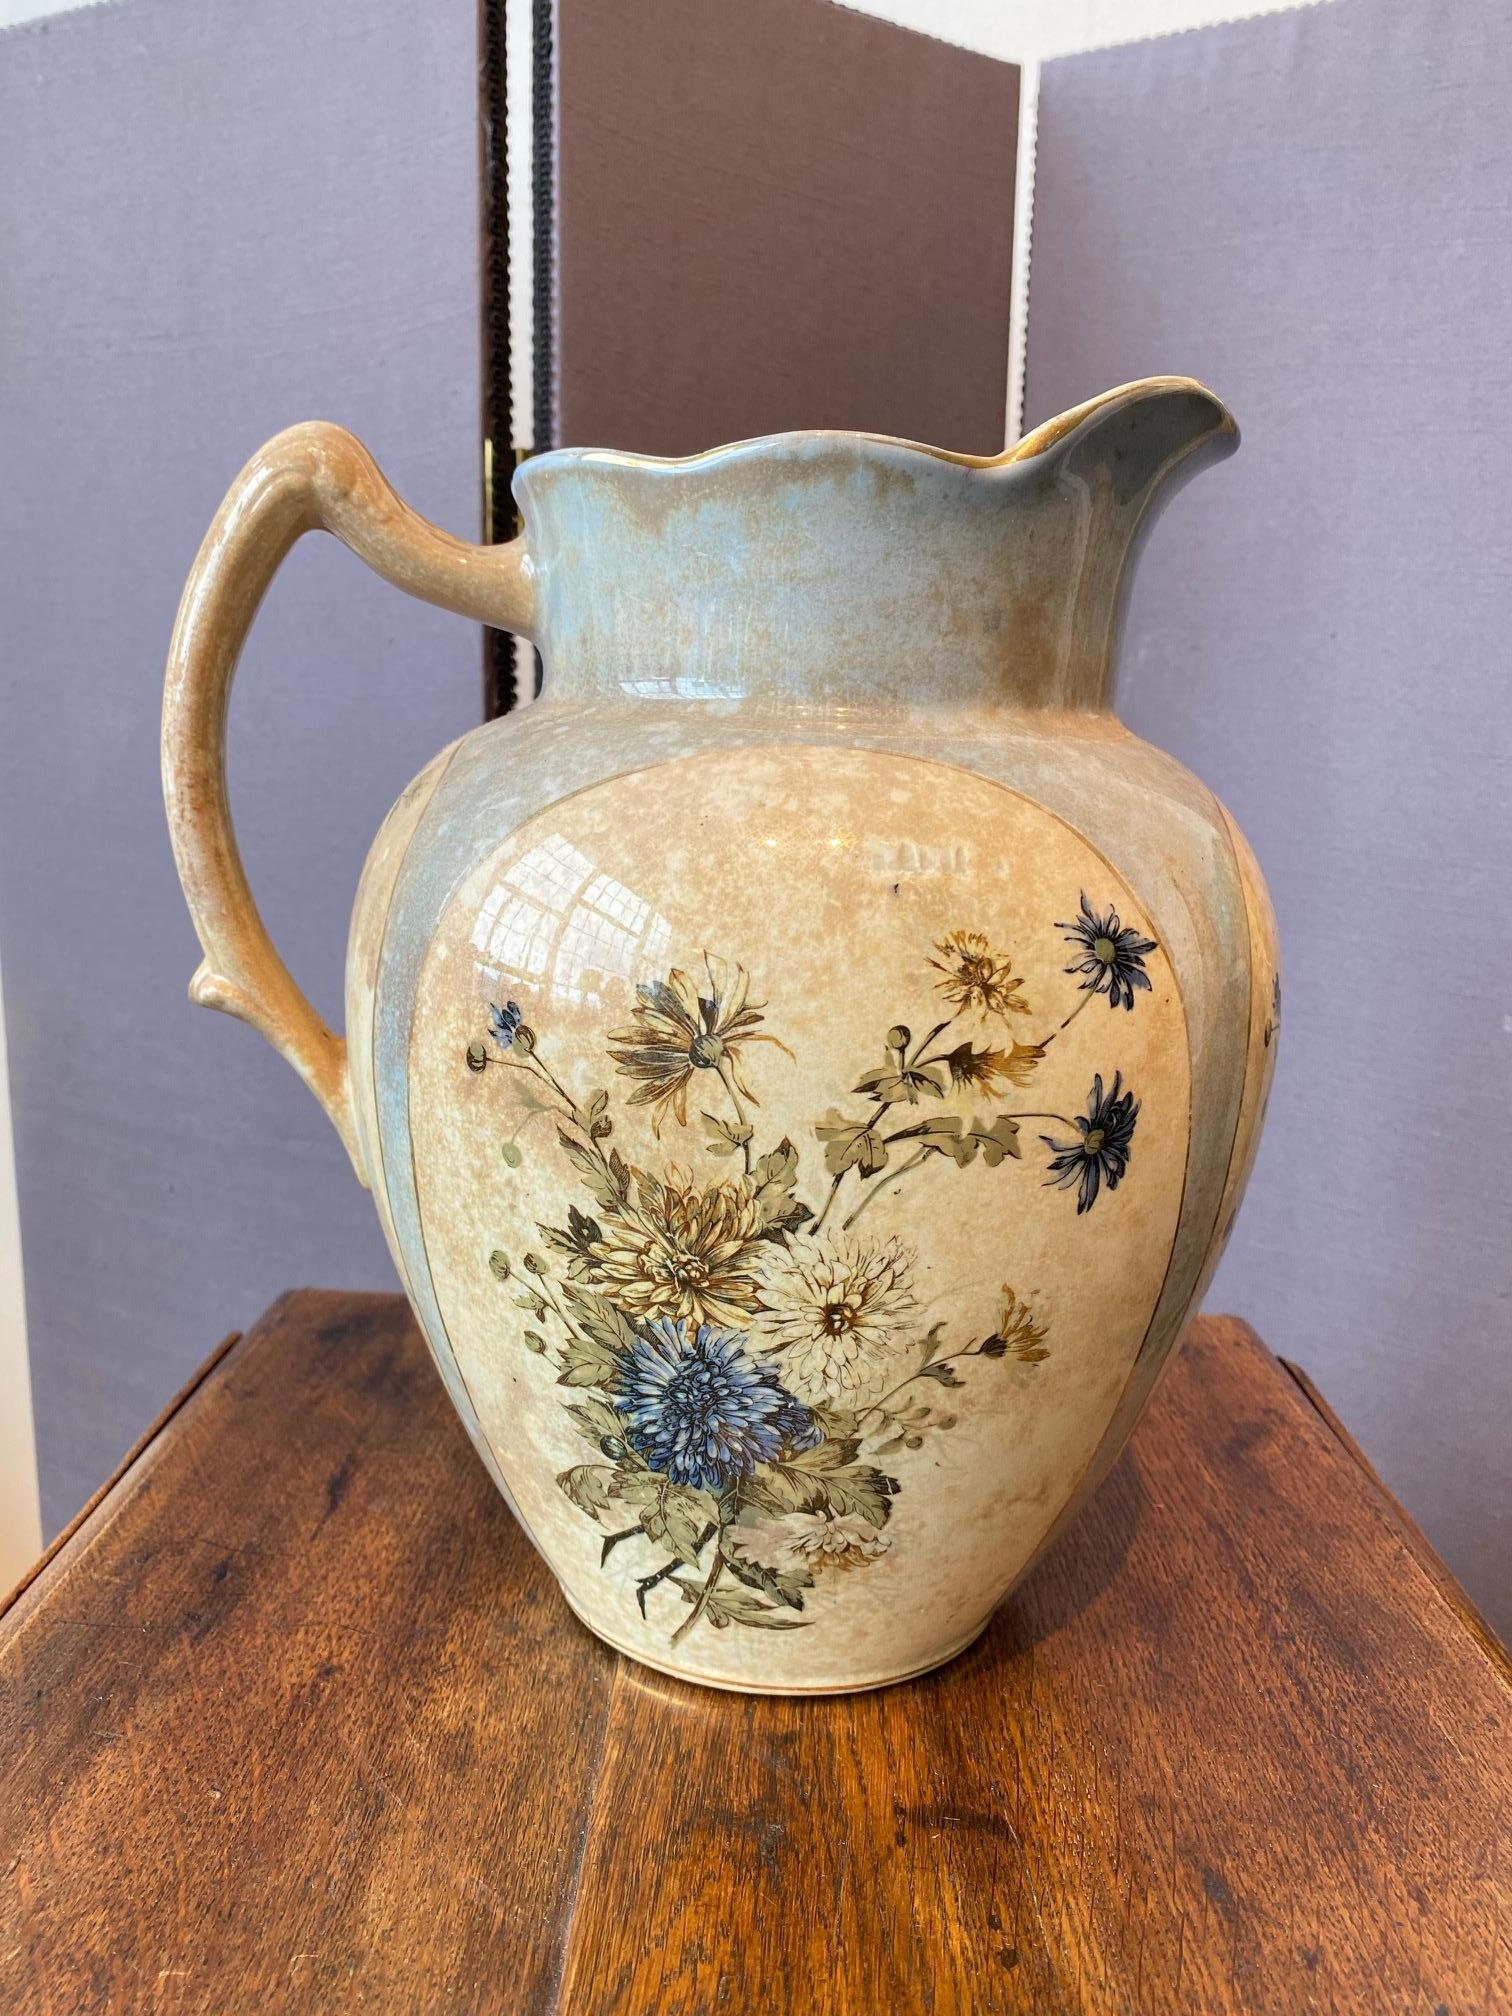 Late 19th century Royce ironstone transferware pitcher with floral motif.